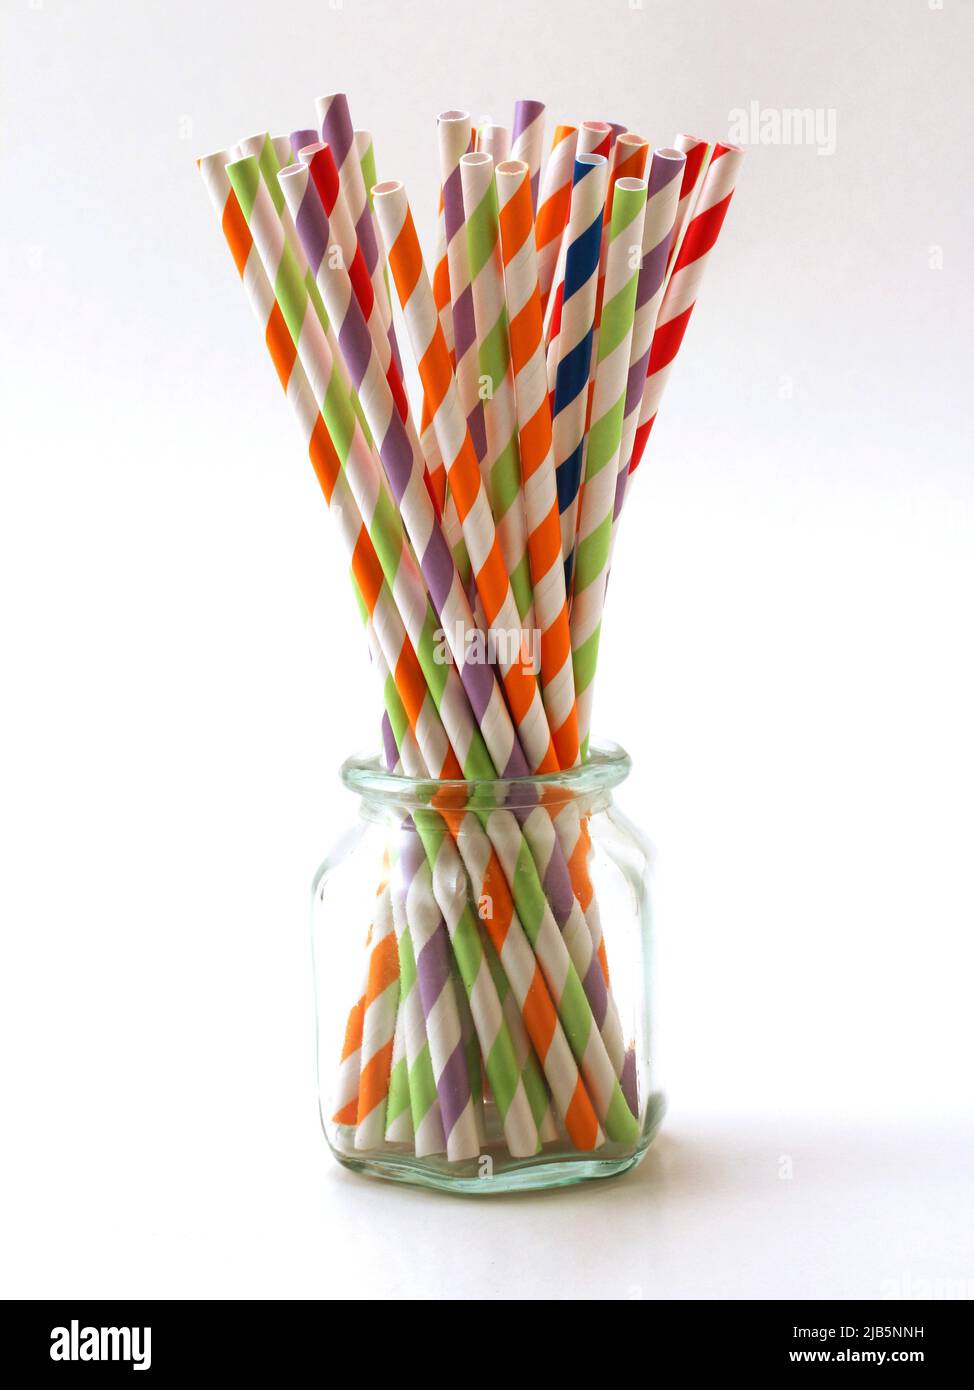 Sustainable drinking straws of paper. Stock Photo